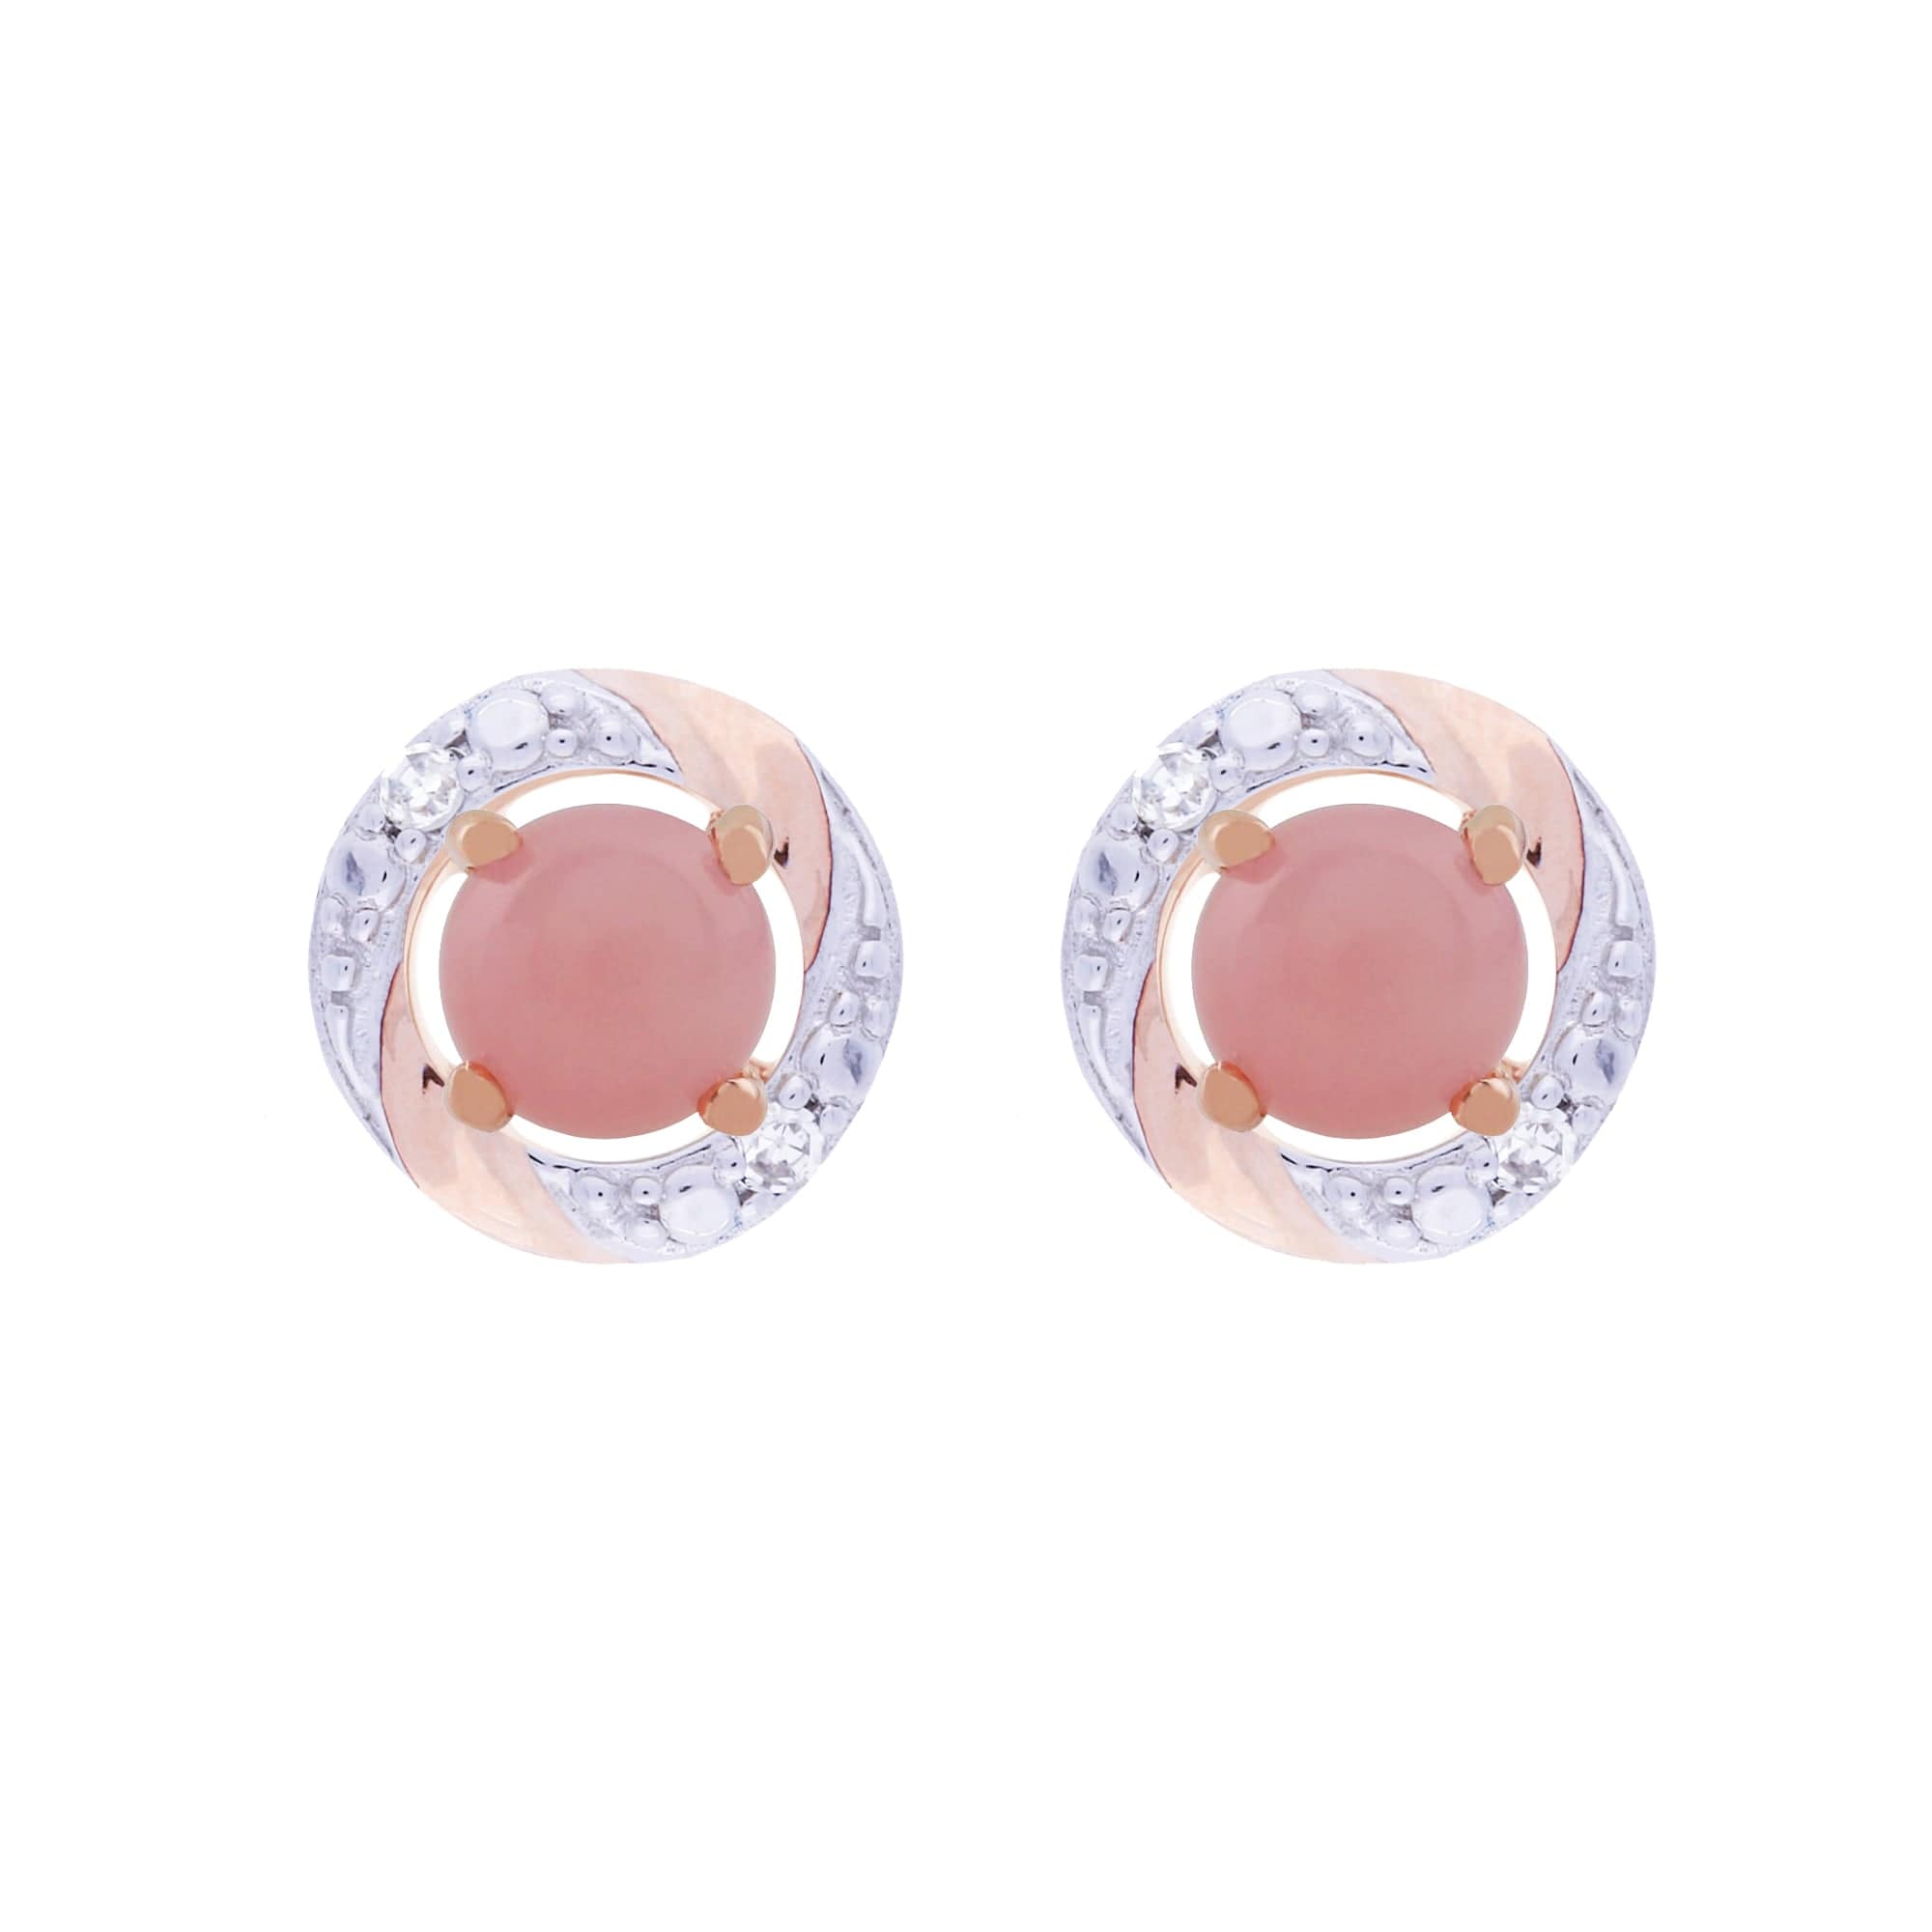 Classic Round Pink Opal Stud Earrings with Detachable Diamond Round Earrings Jacket Set in 9ct Rose Gold - Gemondo